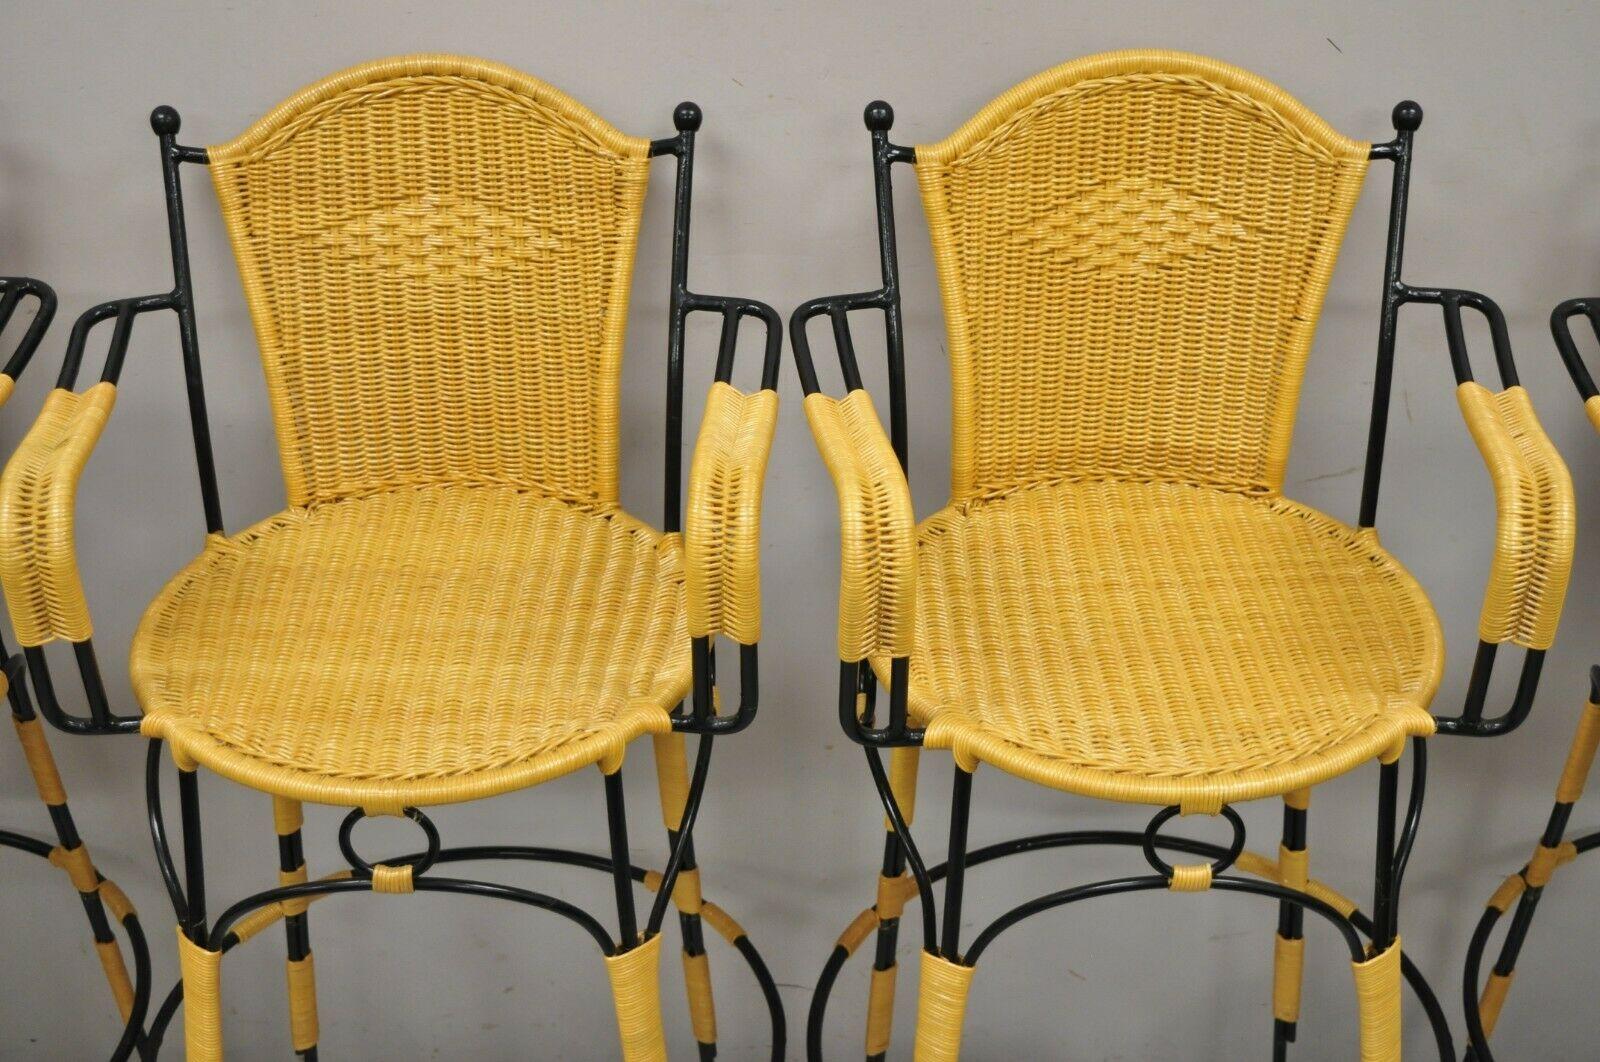 Wrought Iron Woven Vinyl Rattan Spanish Barstools with Arms, Set of 4 In Good Condition For Sale In Philadelphia, PA